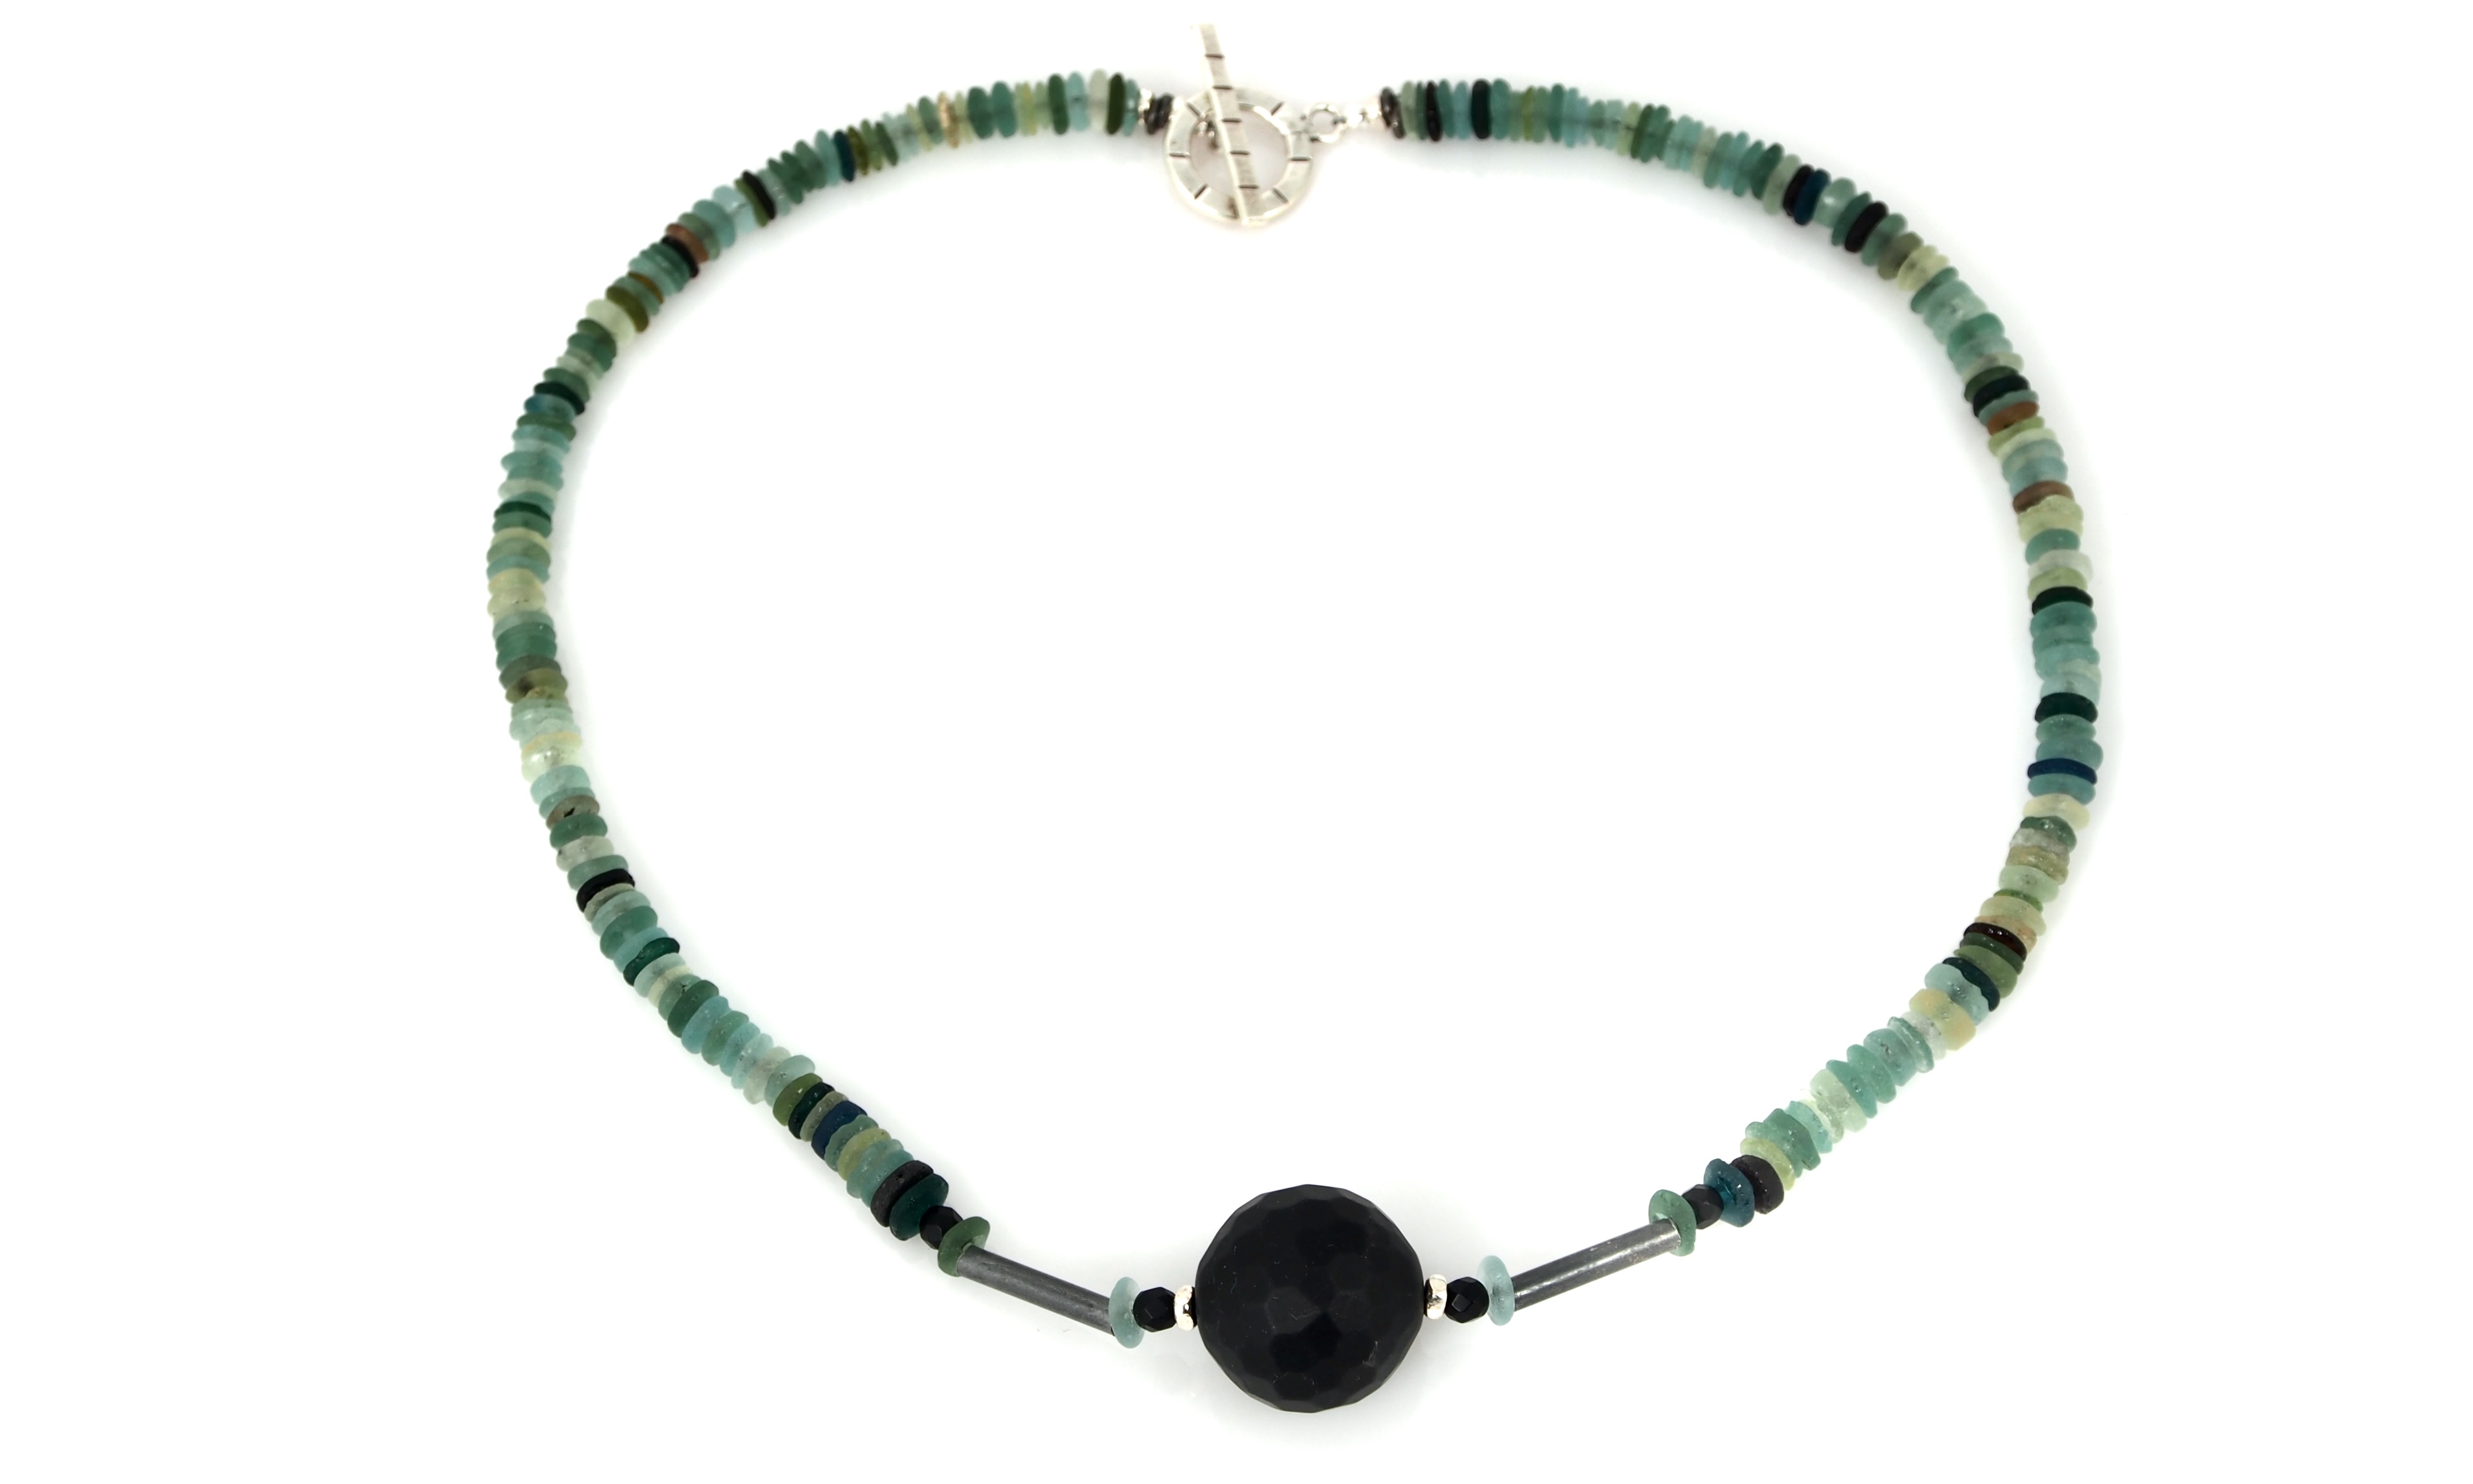 Song of the Ages Necklace - Ancient Roman Glass, Sterling Silver and Black Onyx, 19